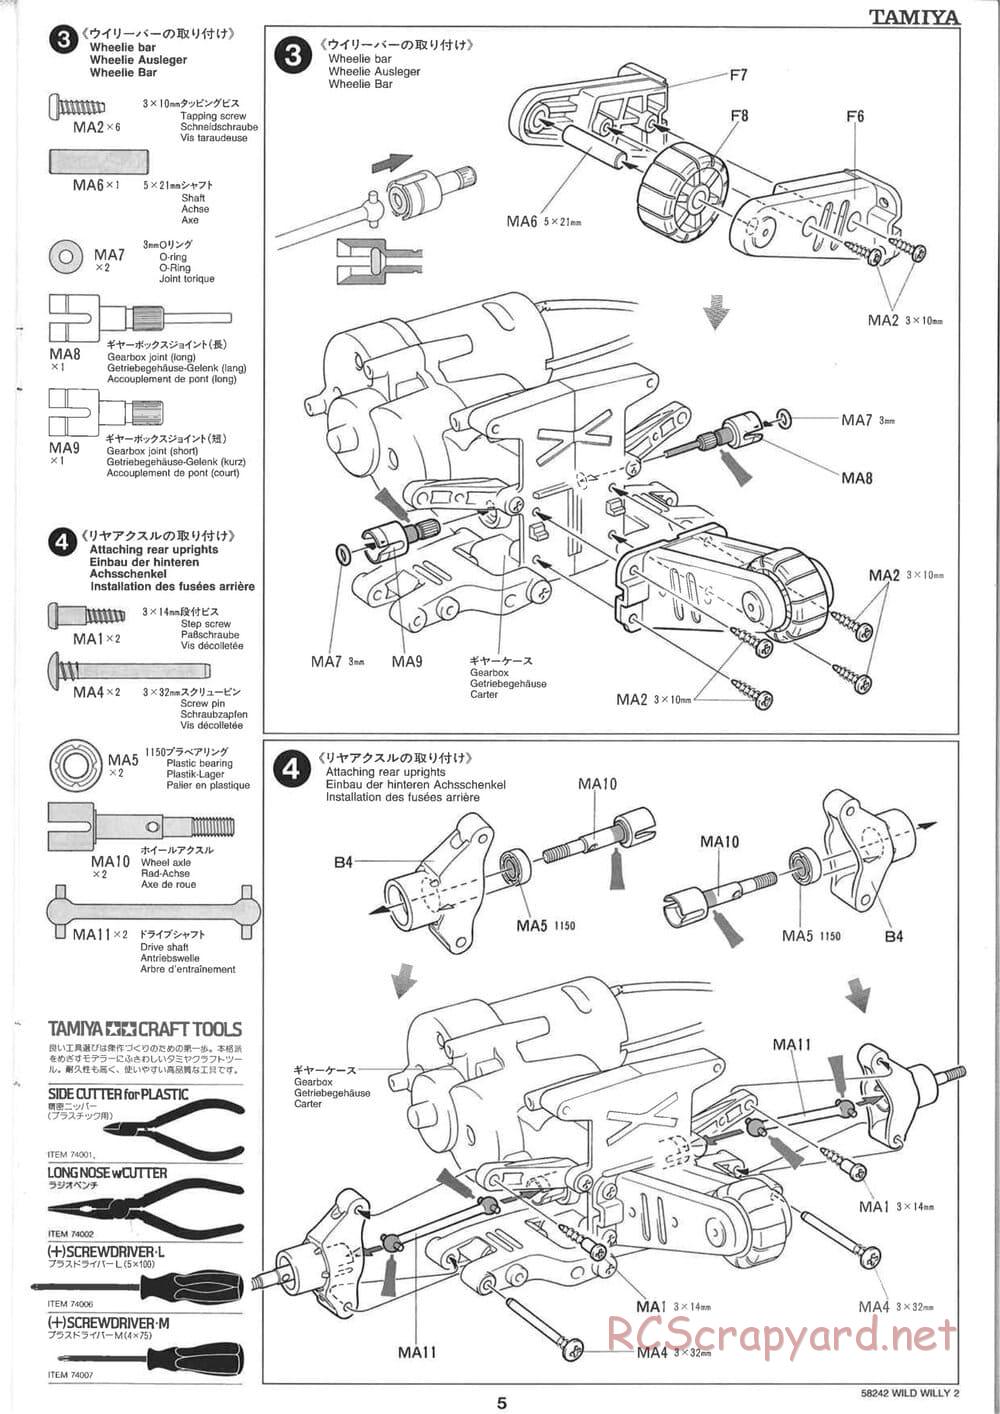 Tamiya - Wild Willy 2 - WR-02 Chassis - Manual - Page 5